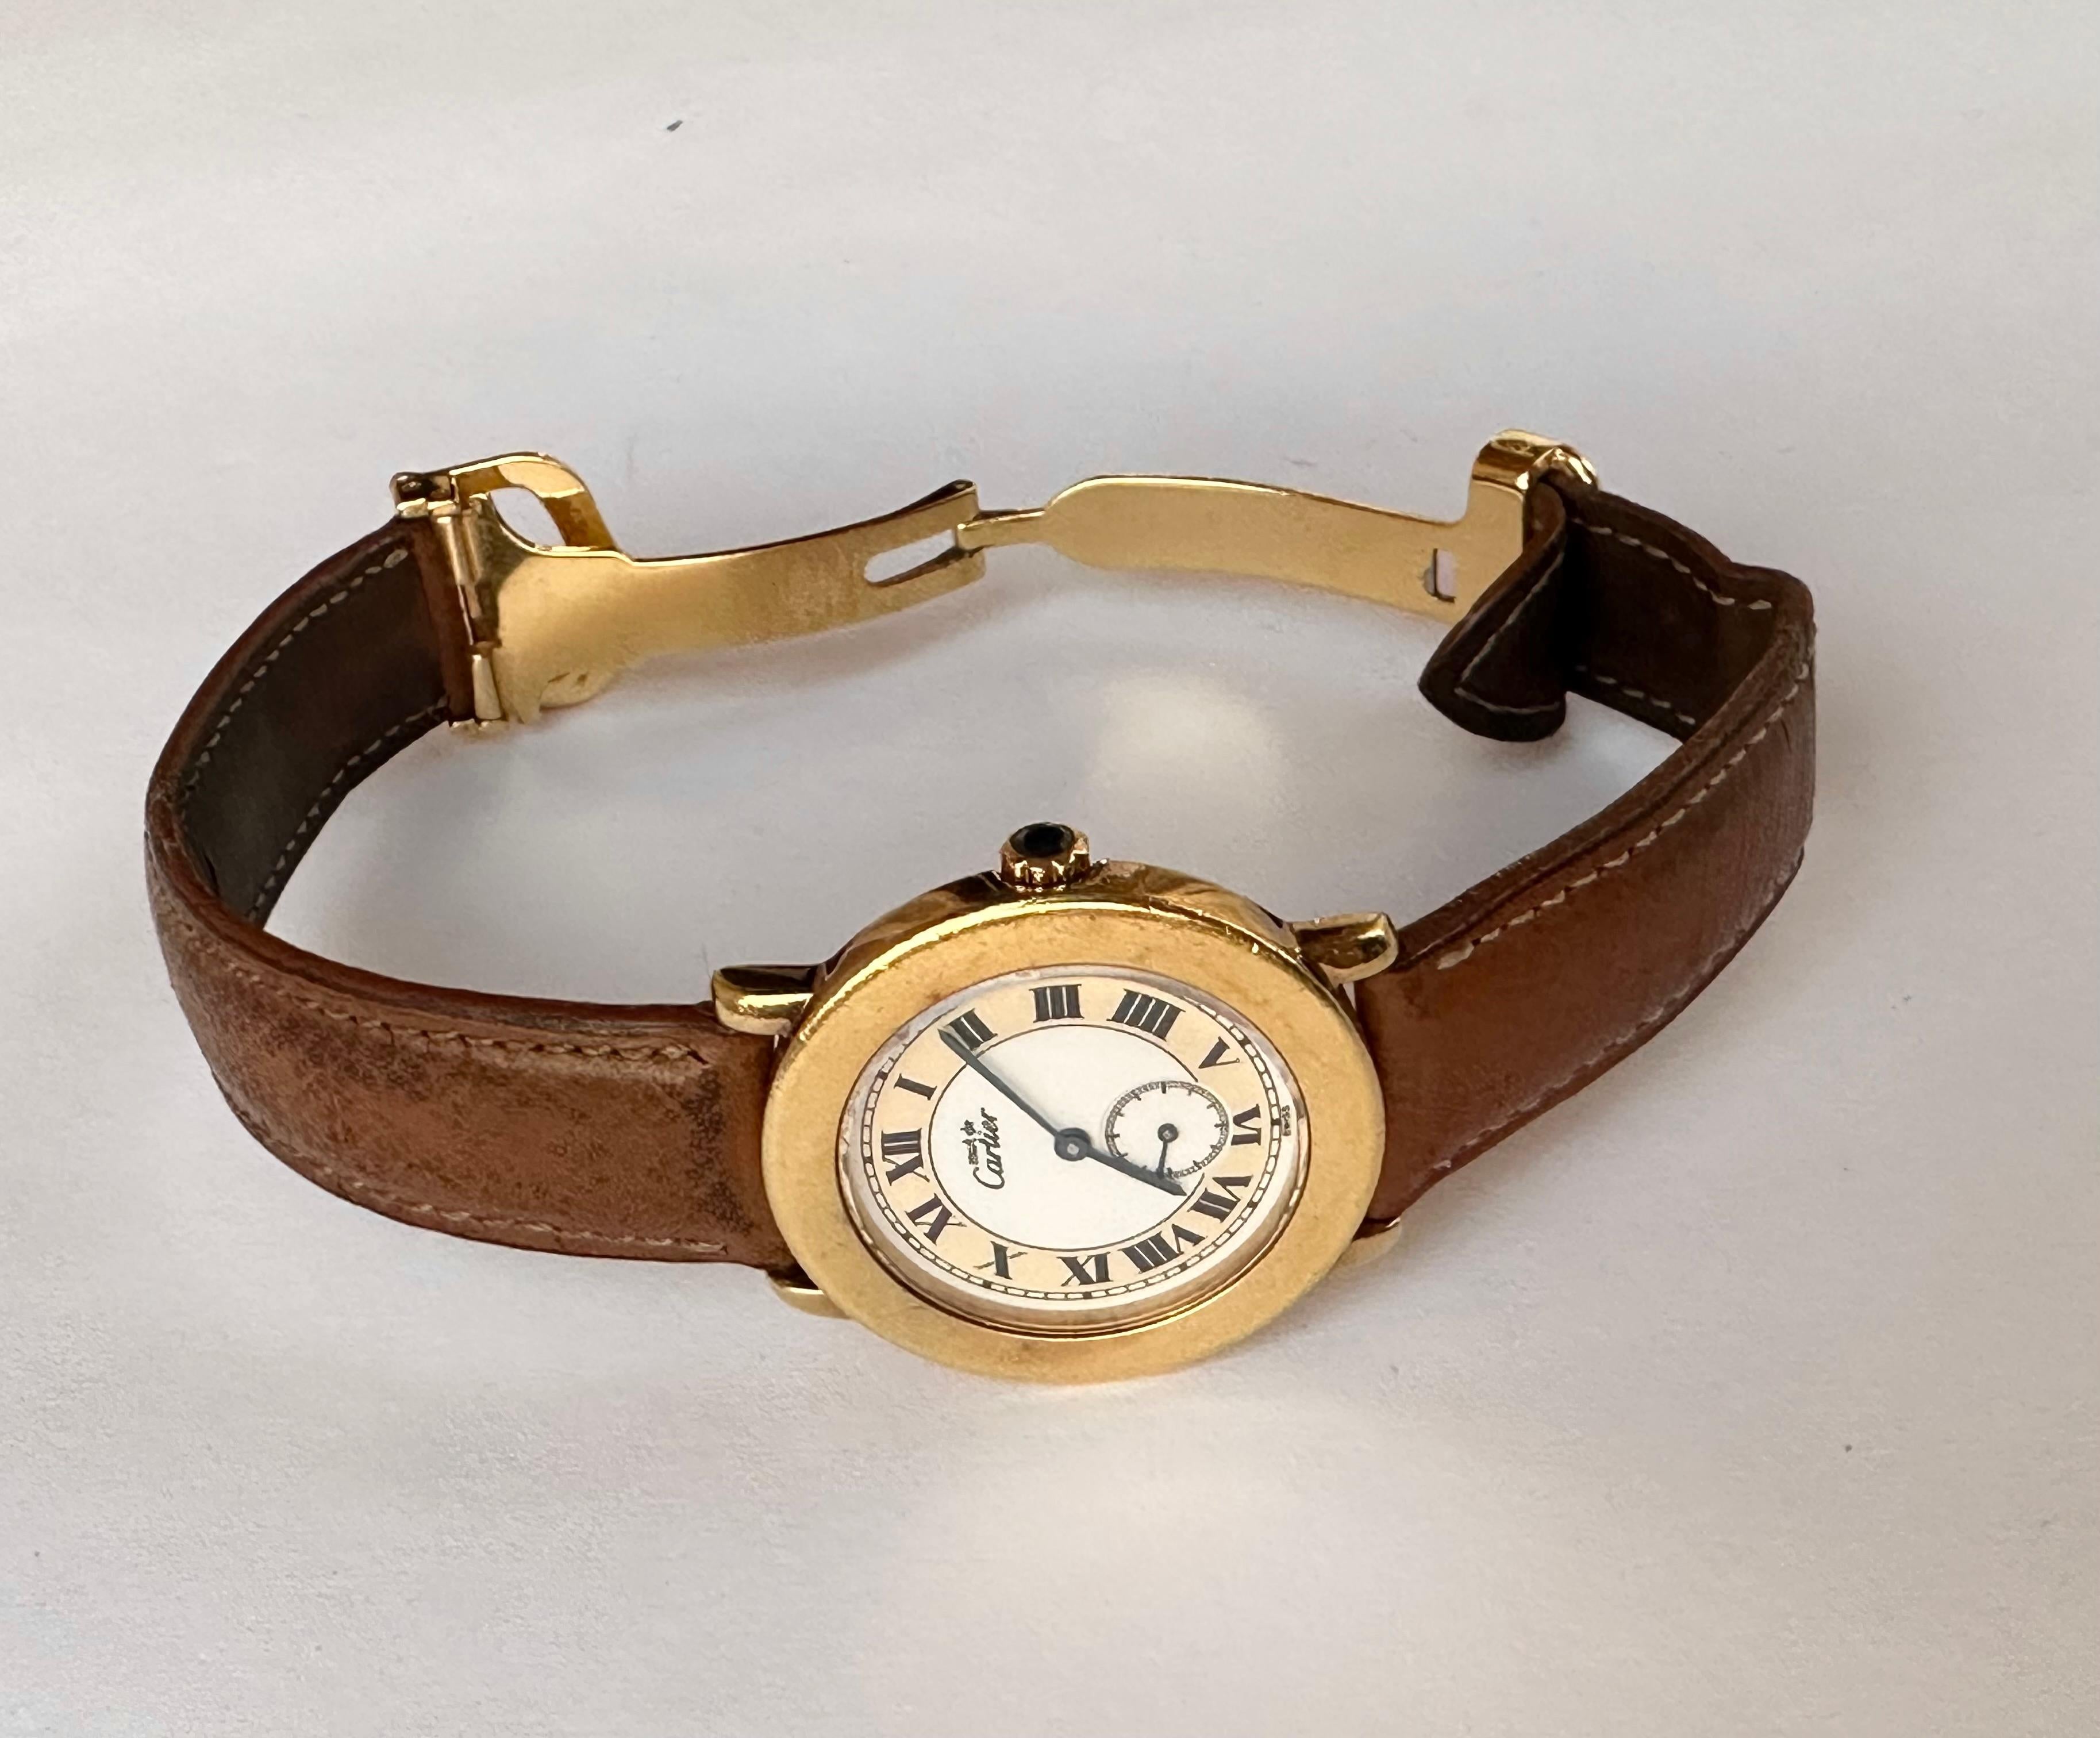 Brand: Cartier

Model: Must de Cartier

Reference Number: 1810 1

Country Of Manufacture: Switzerland

Movement: Quartz

Case Material: Silver 925 Gold Plated

Measurements : Case width: 32 mm. (without crown)

Band Type : Leather

Band Condition :